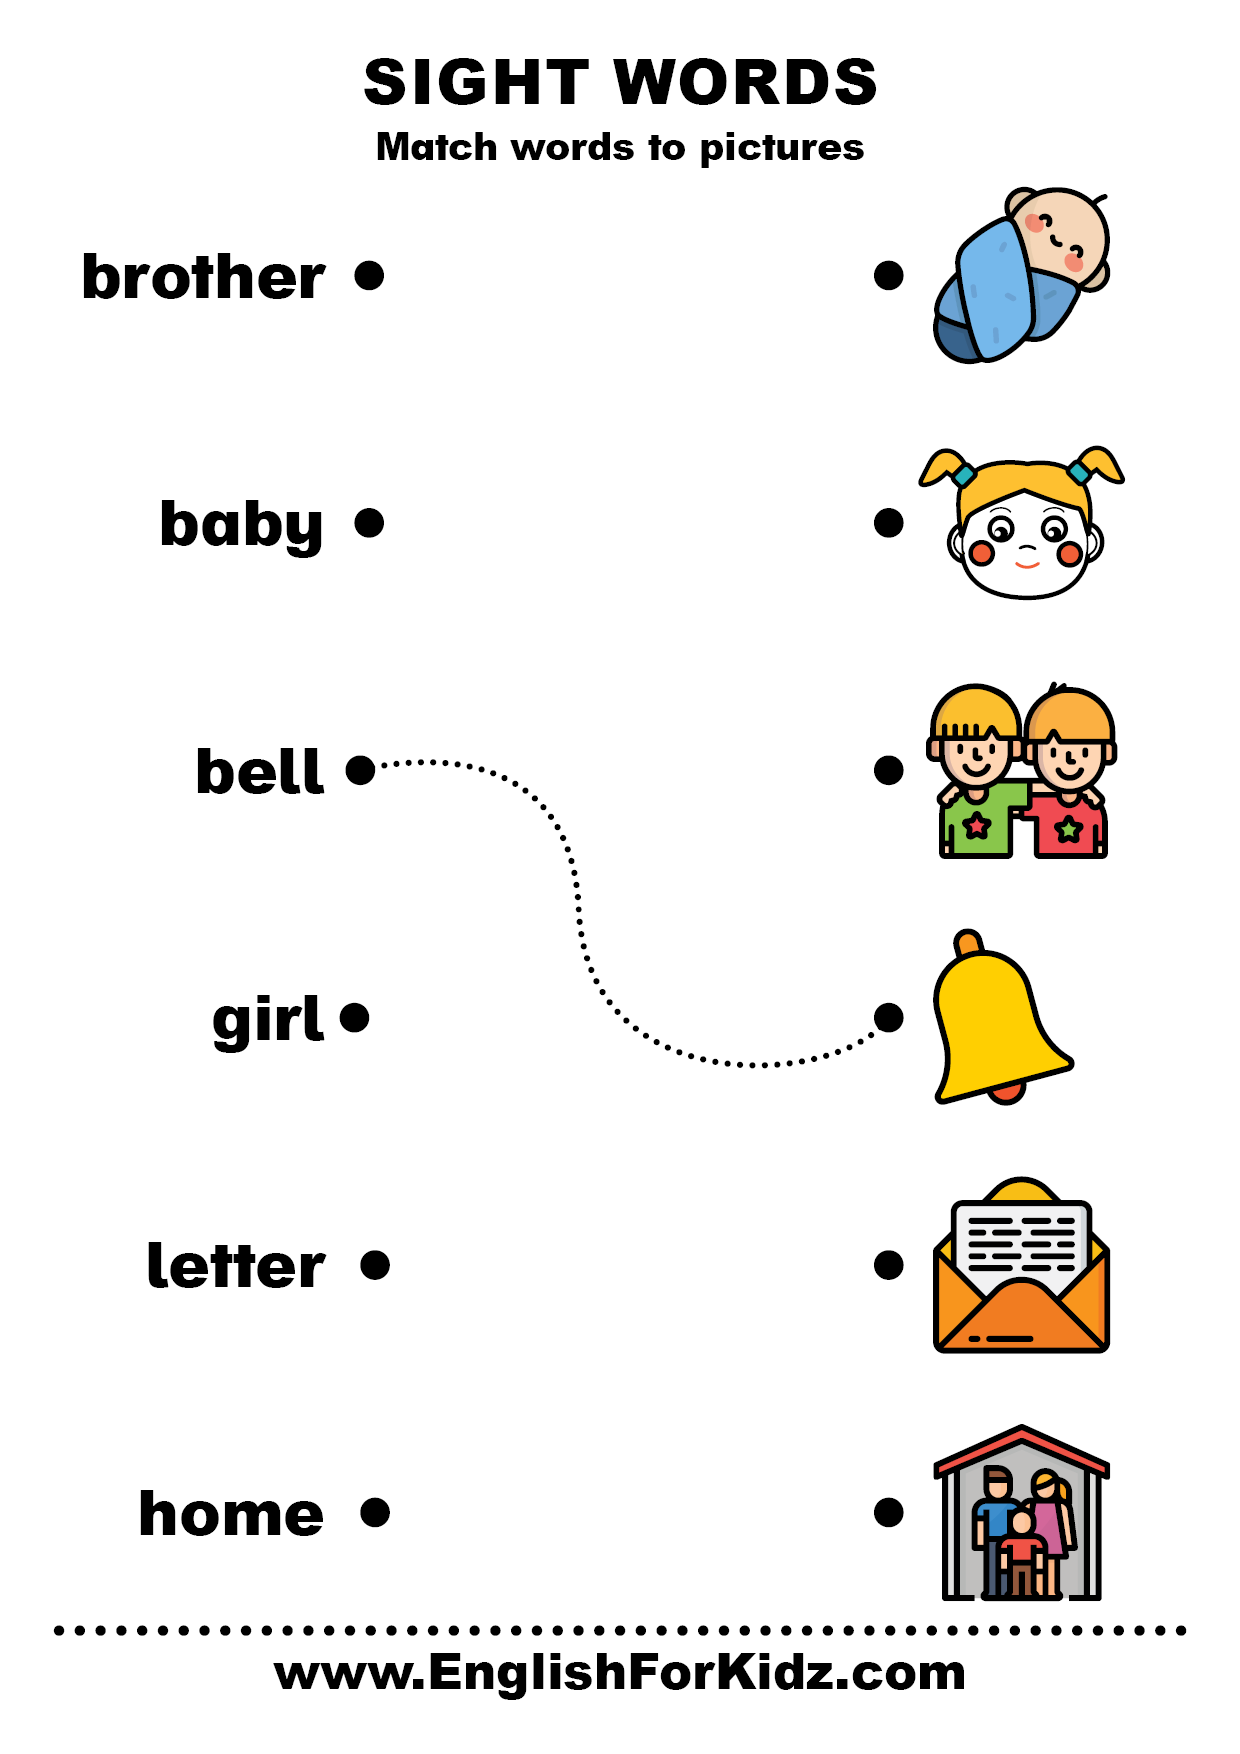 english-for-kids-step-by-step-sight-words-worksheets